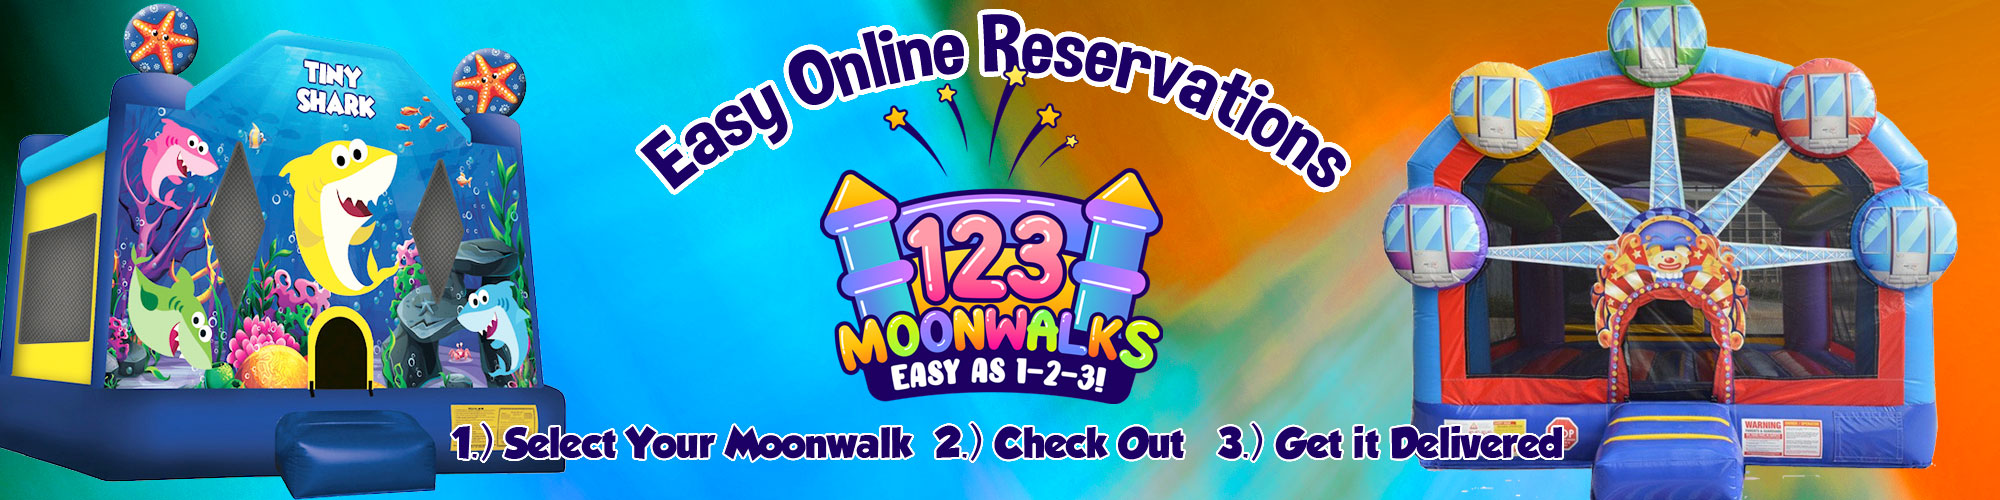 Easy Online Reservations